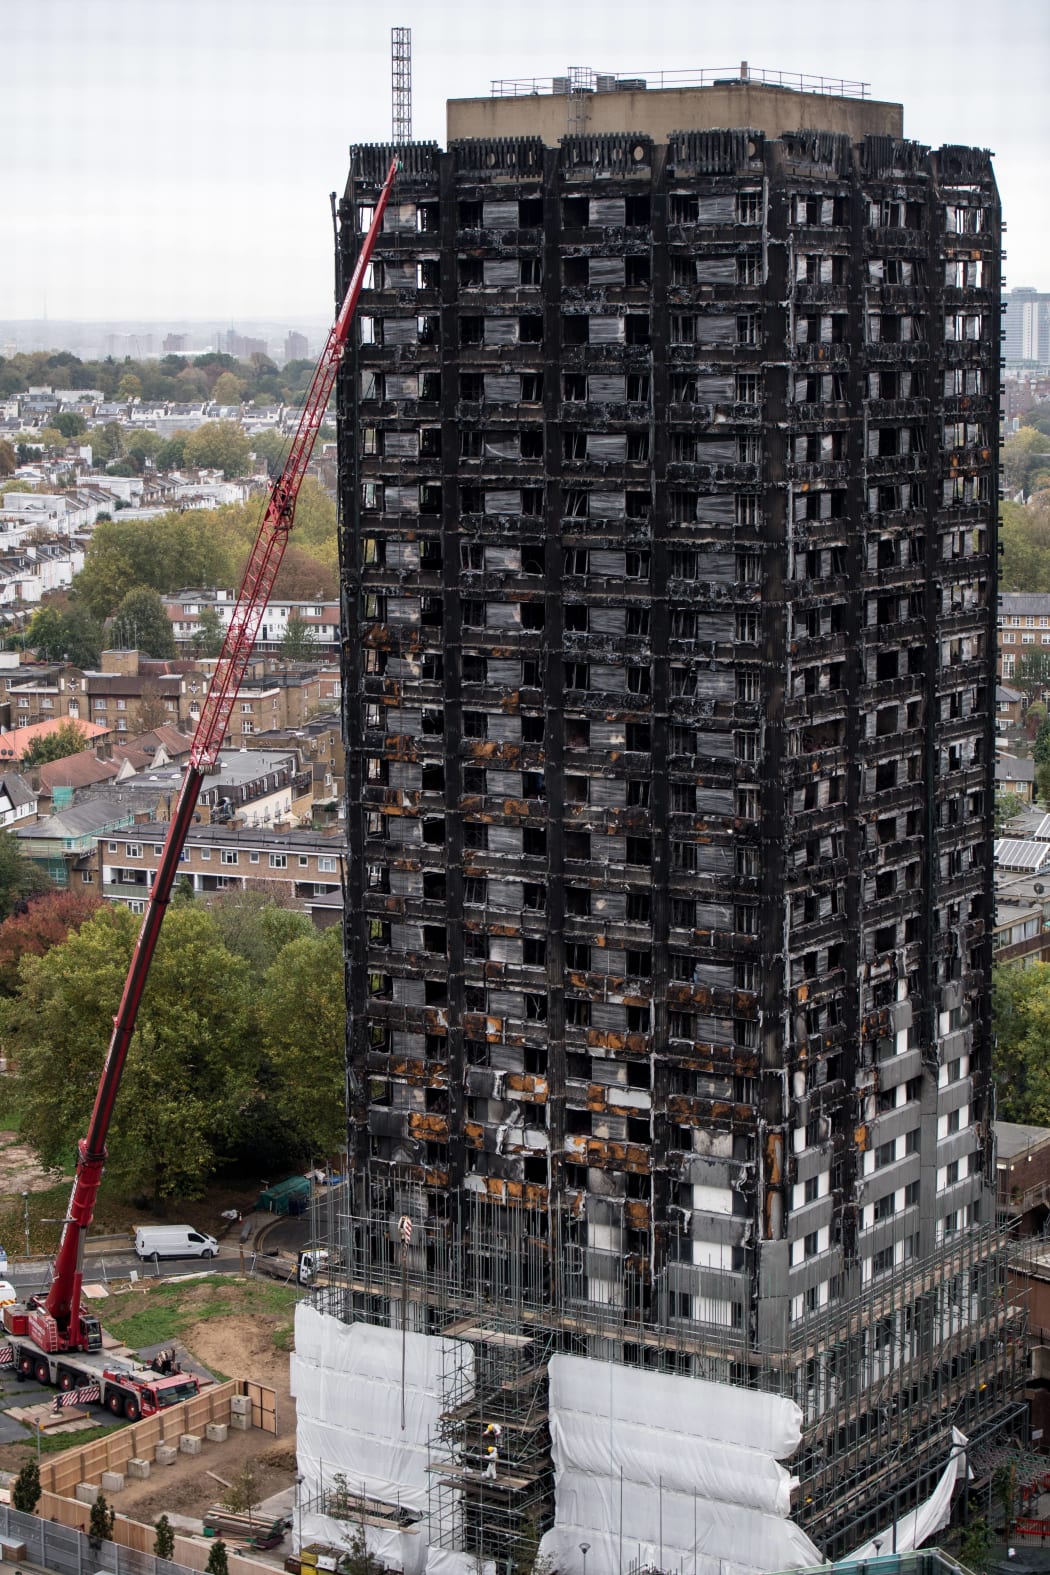 The burned-out-shell of Grenfell Tower in London.